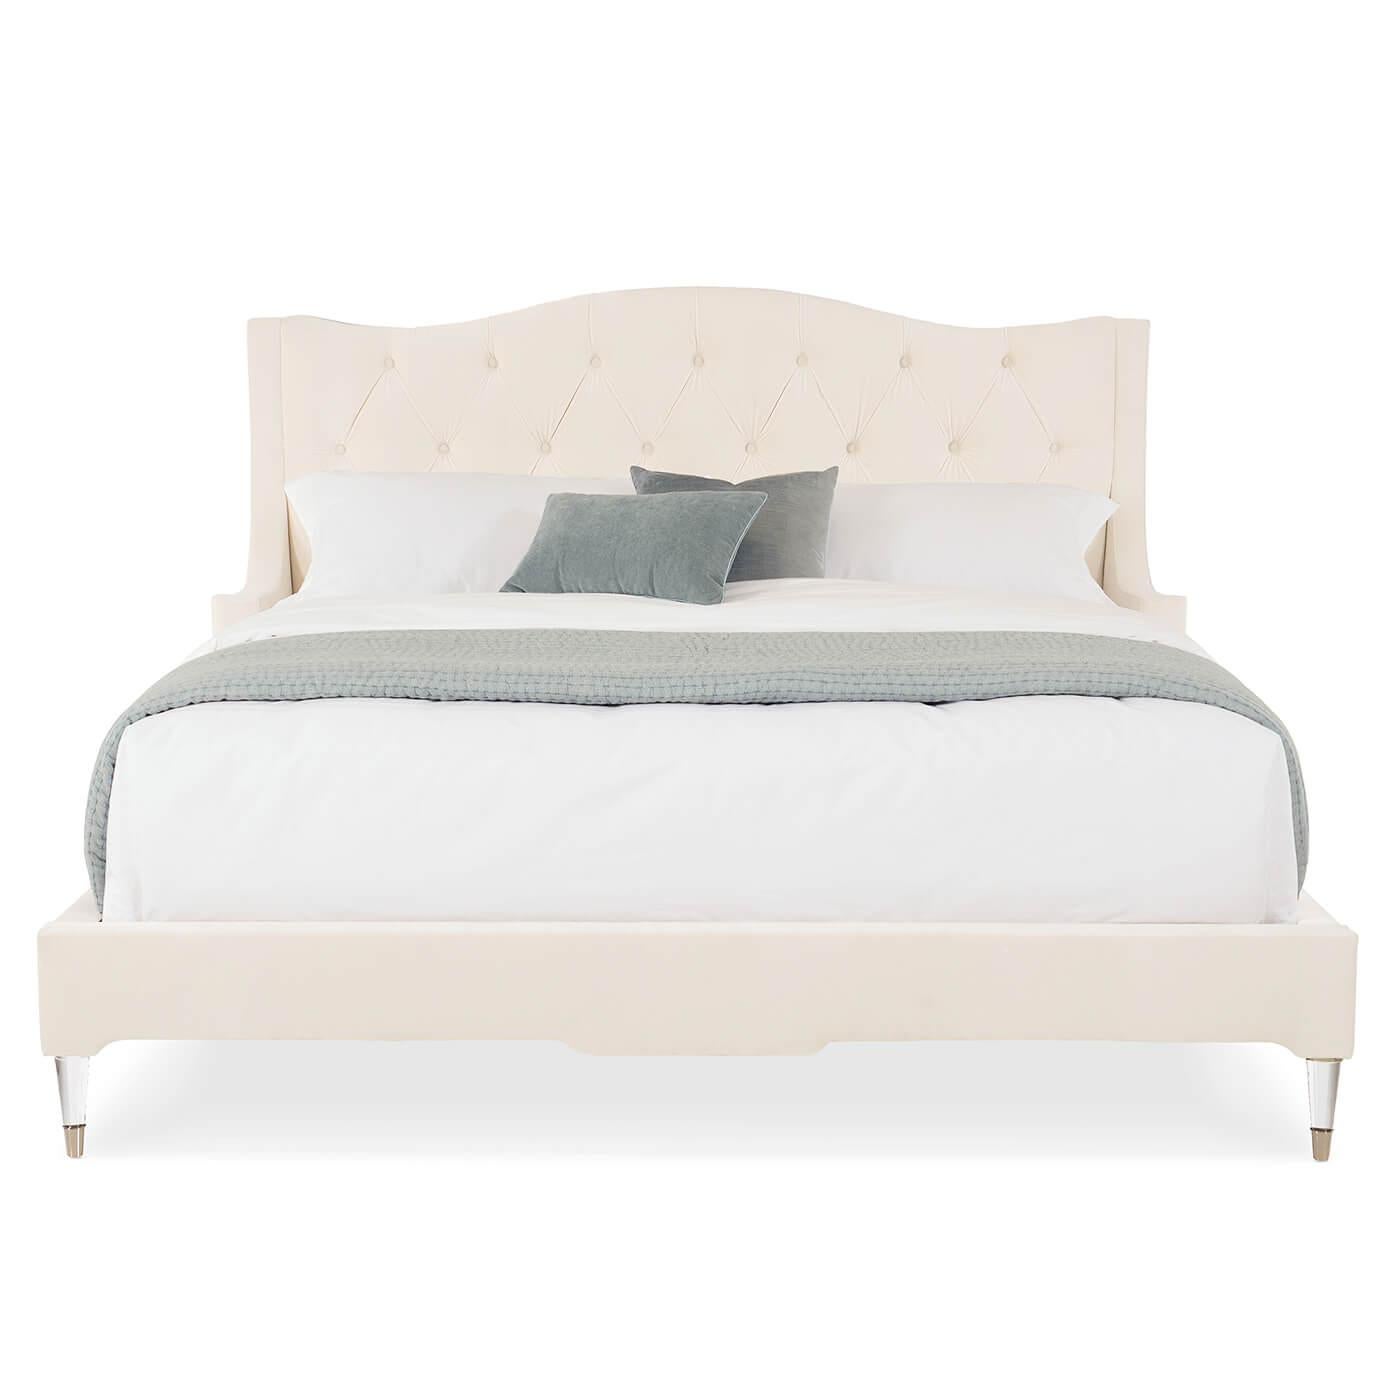 A velvet tufted upholstered king bed with a tufted diamond-pattern headboard. This bed is upholstered in luxurious cream velvet. The sides of the headboard wrap around with a design inspired by an English armchair. It has wooden legs finished in